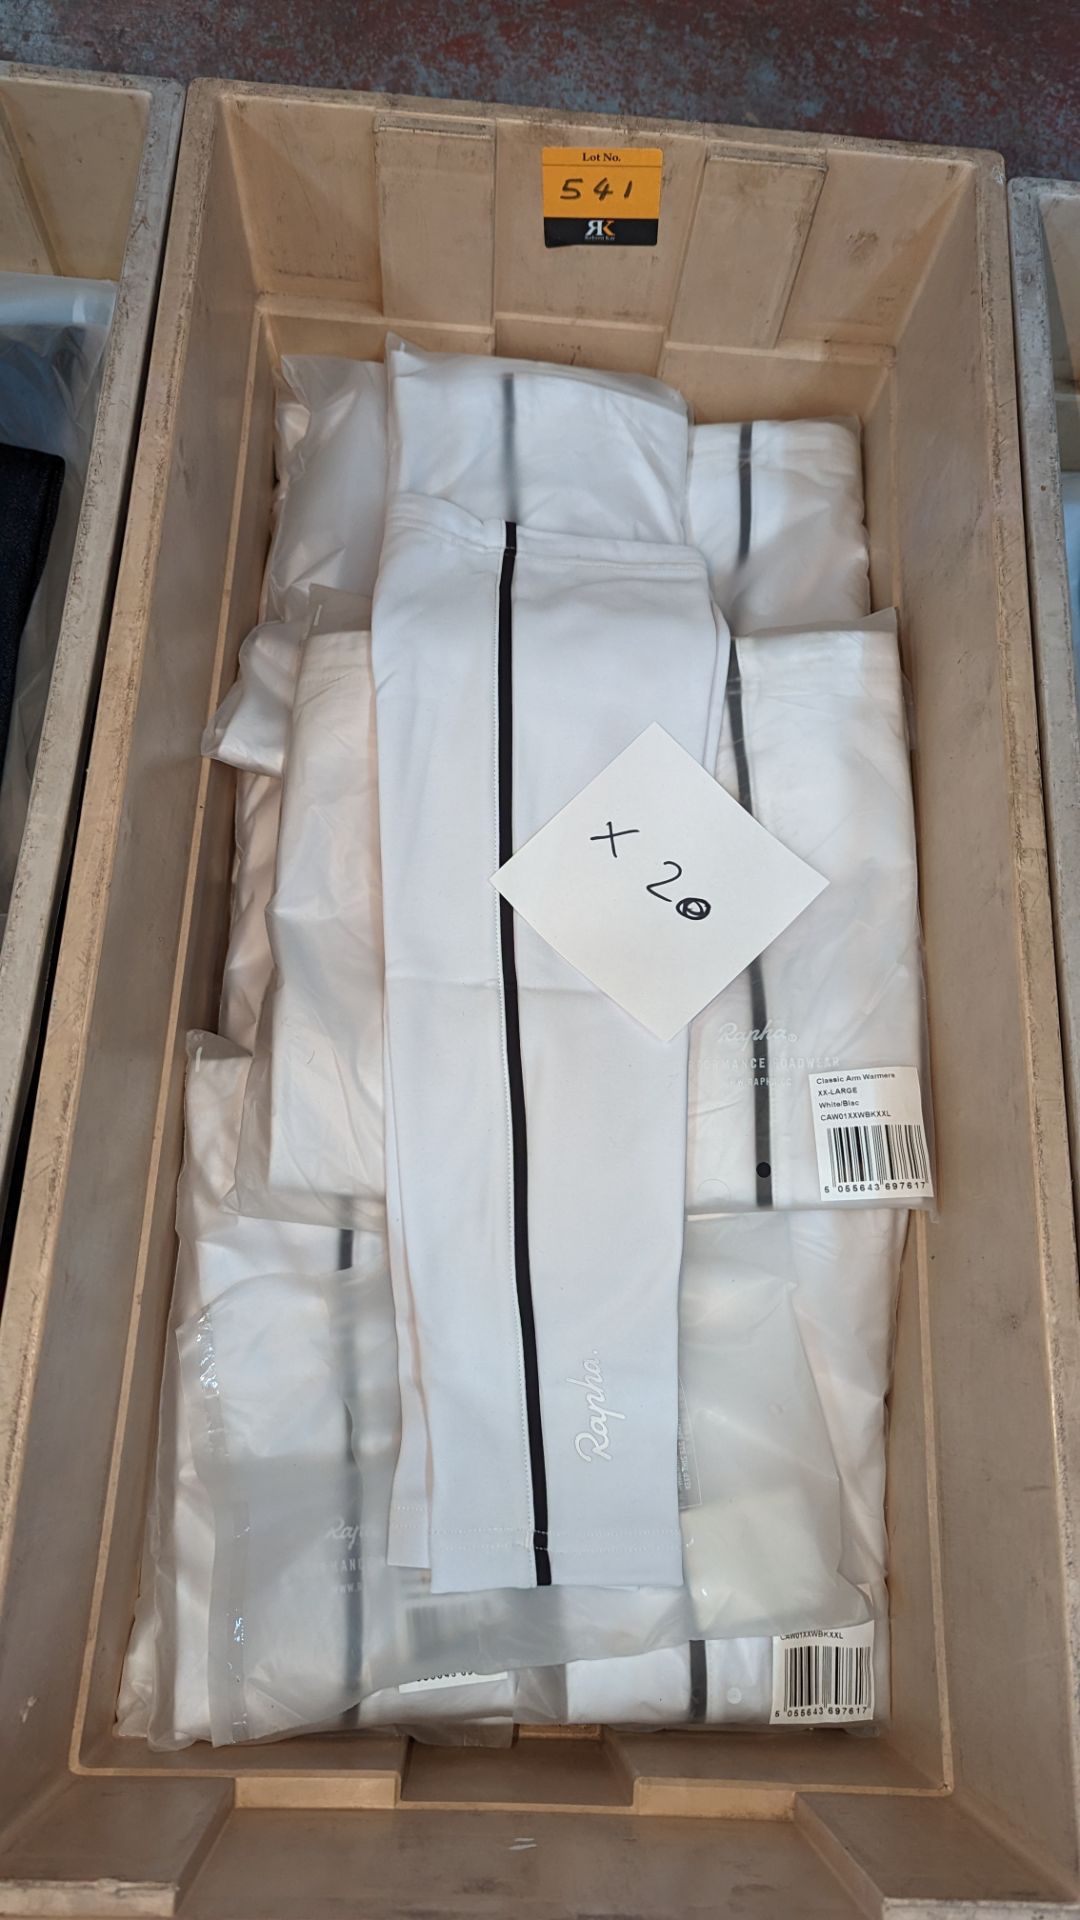 20 pairs of Rapha Cycling ladies arm warmers, in white with black detailing. These mostly appear to